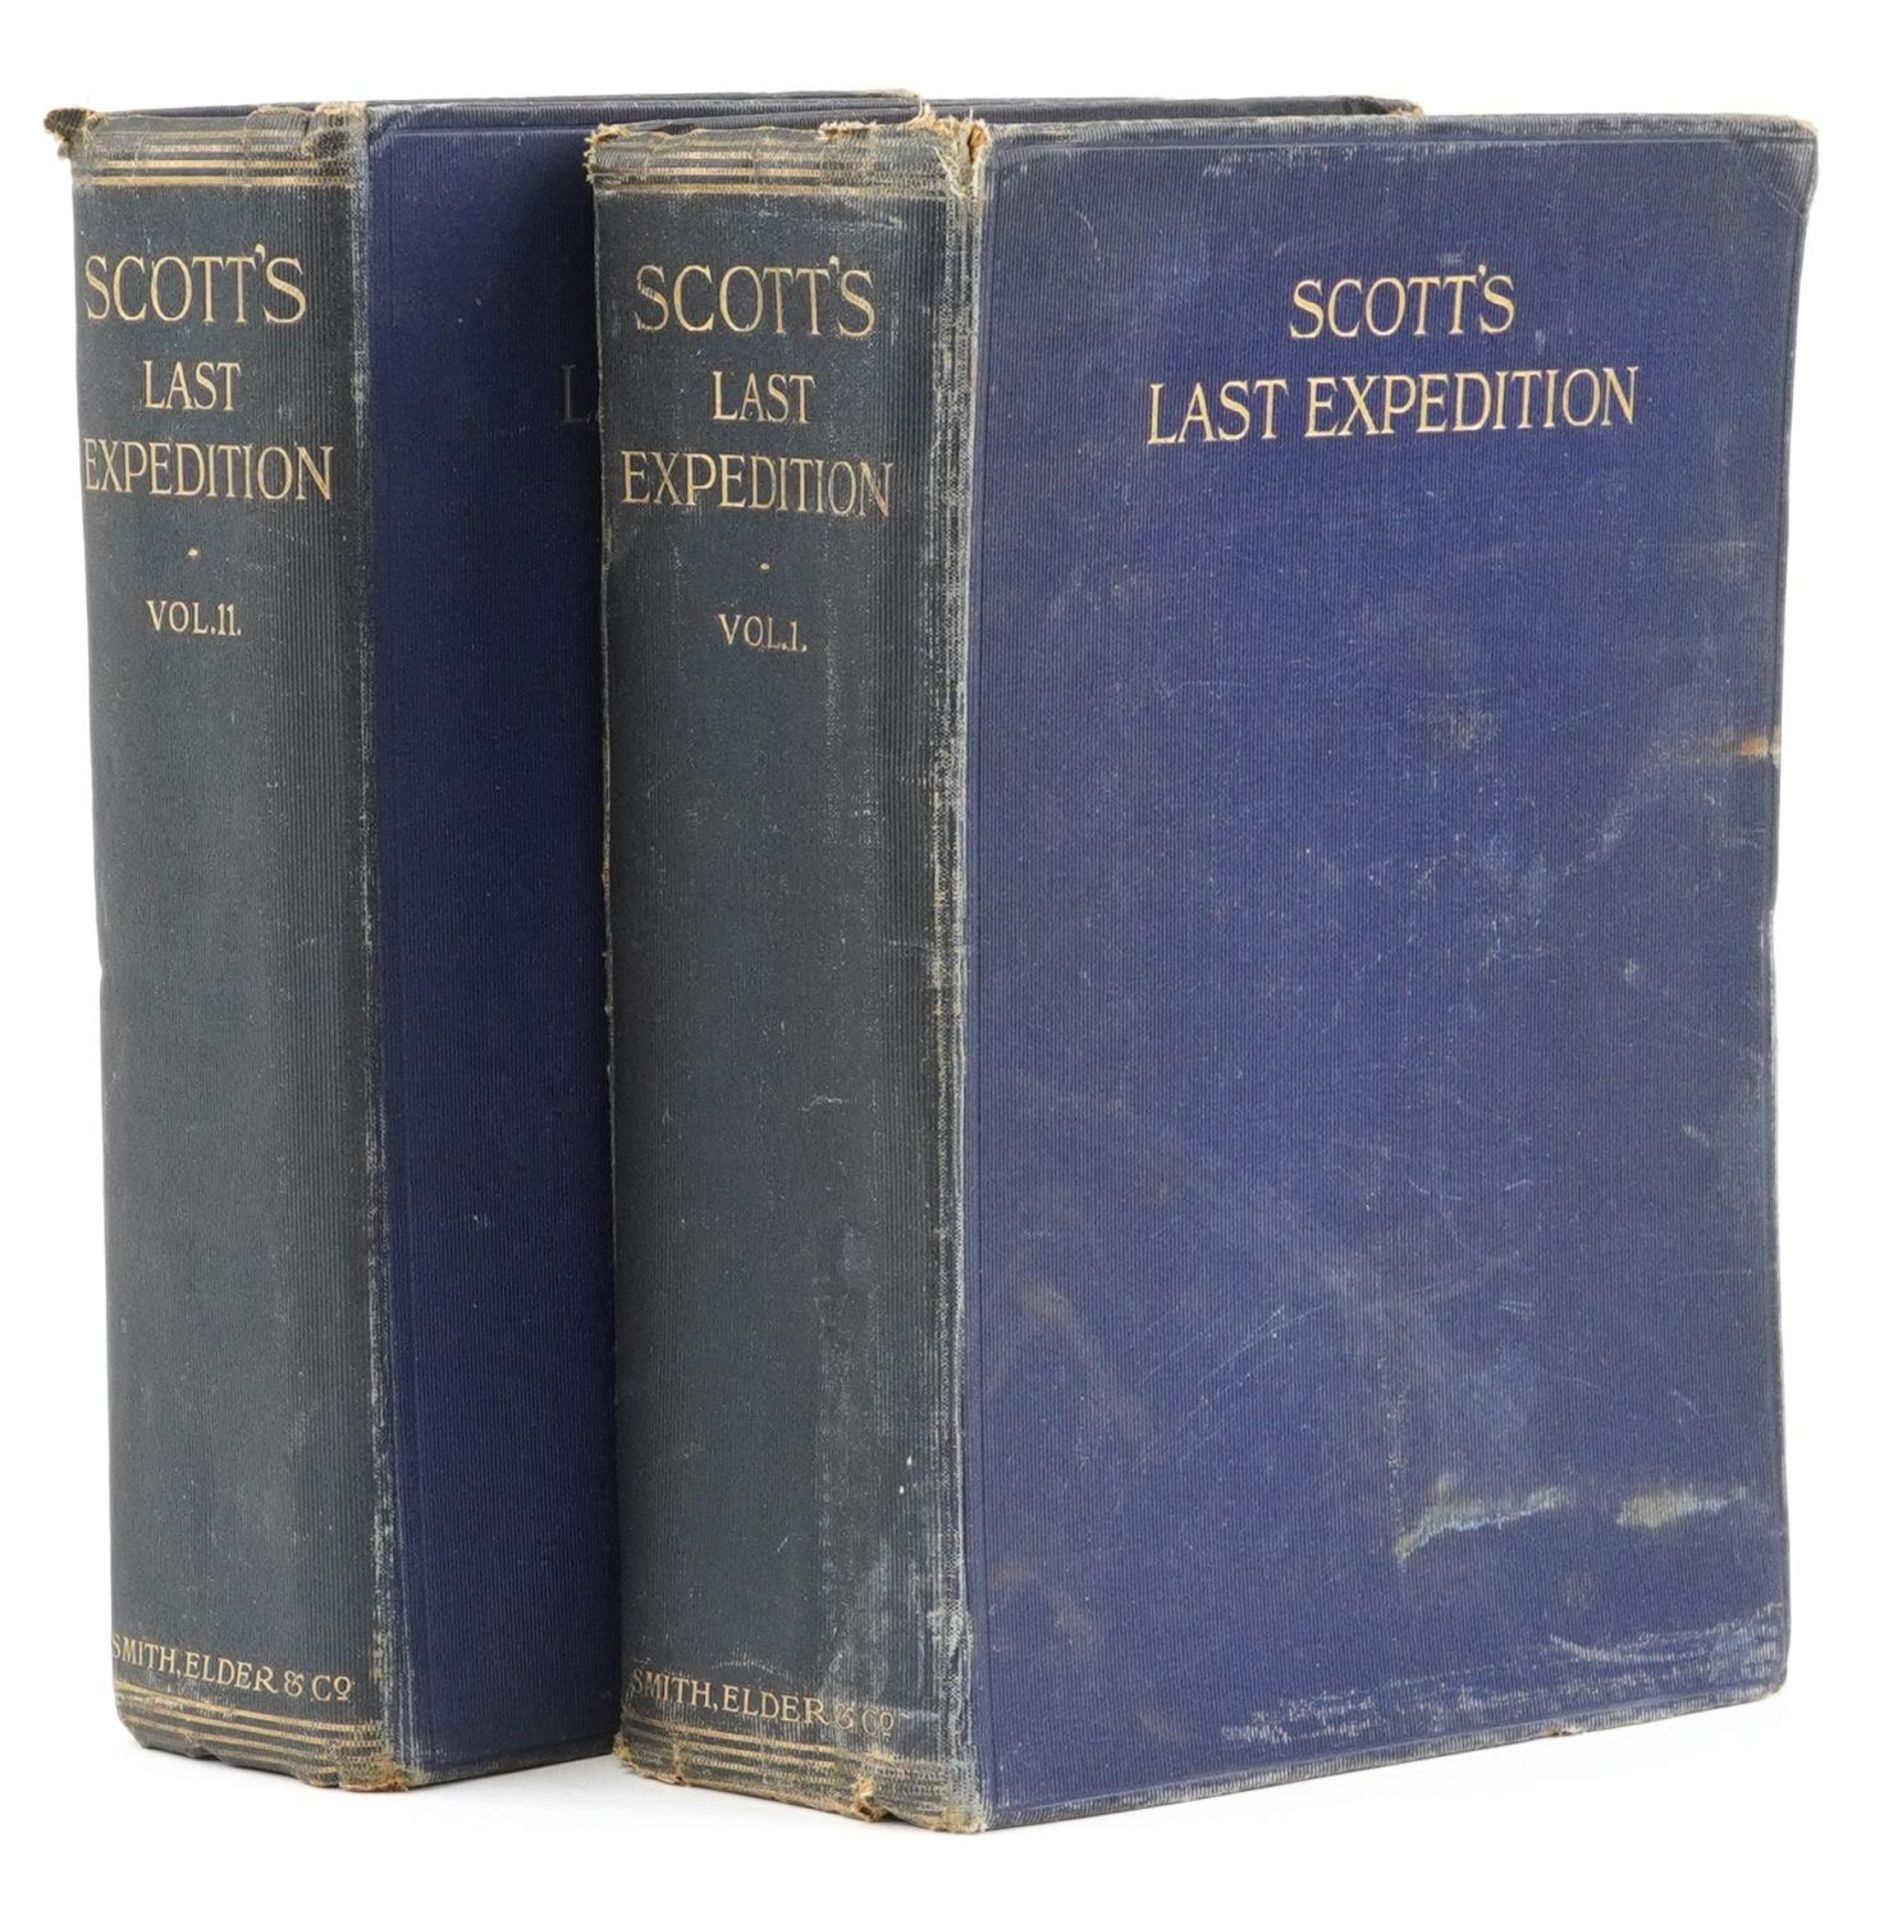 Scott's Last Expedition, two hardback books volumes 1 and 2, published by Smith Alder & Co 1913